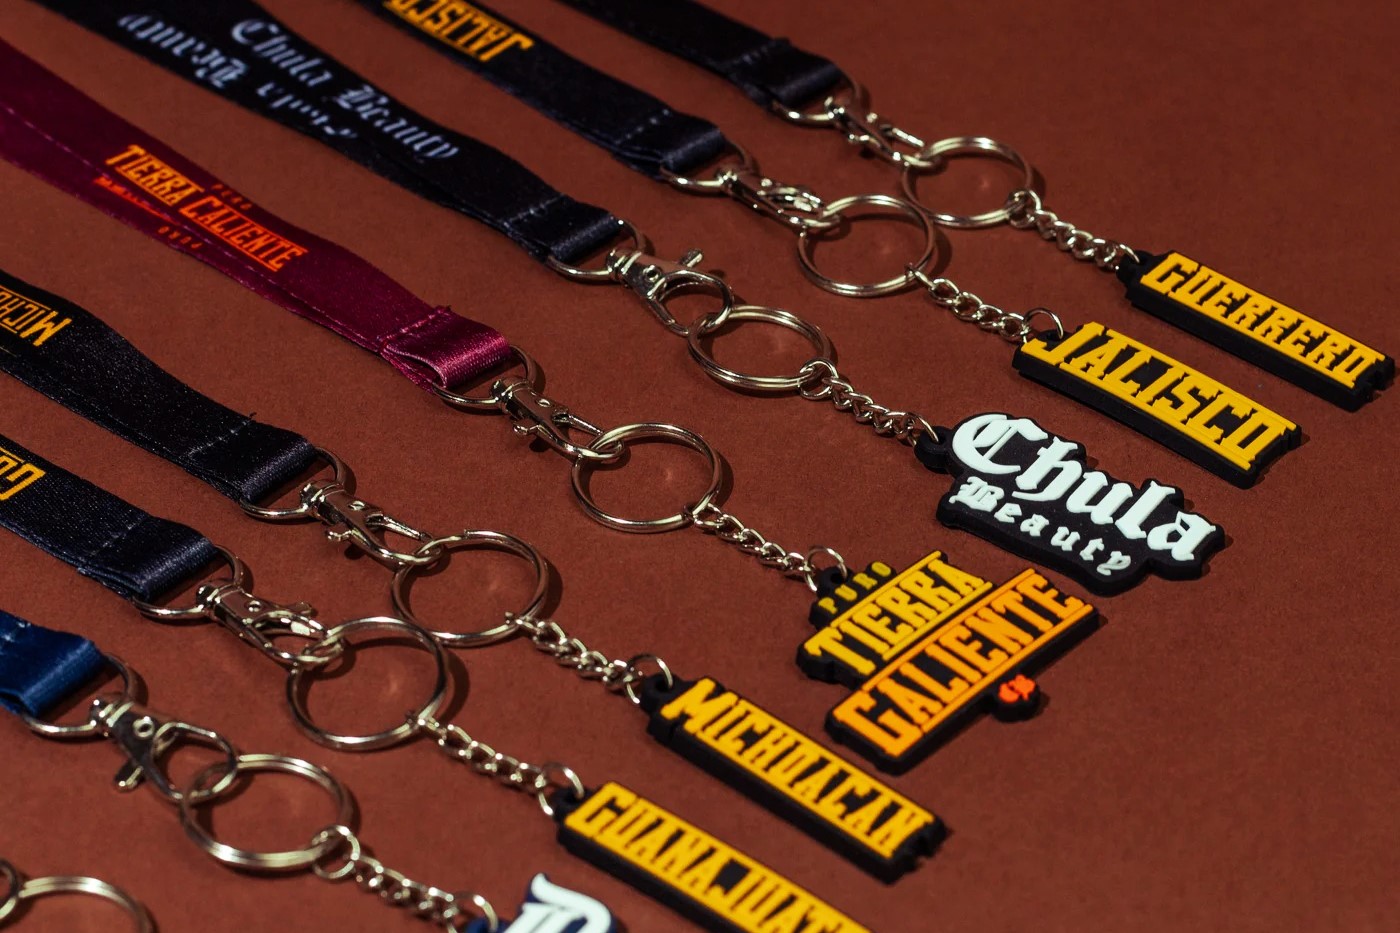 Lanyard Locating: Discovering Where To Find Lanyards